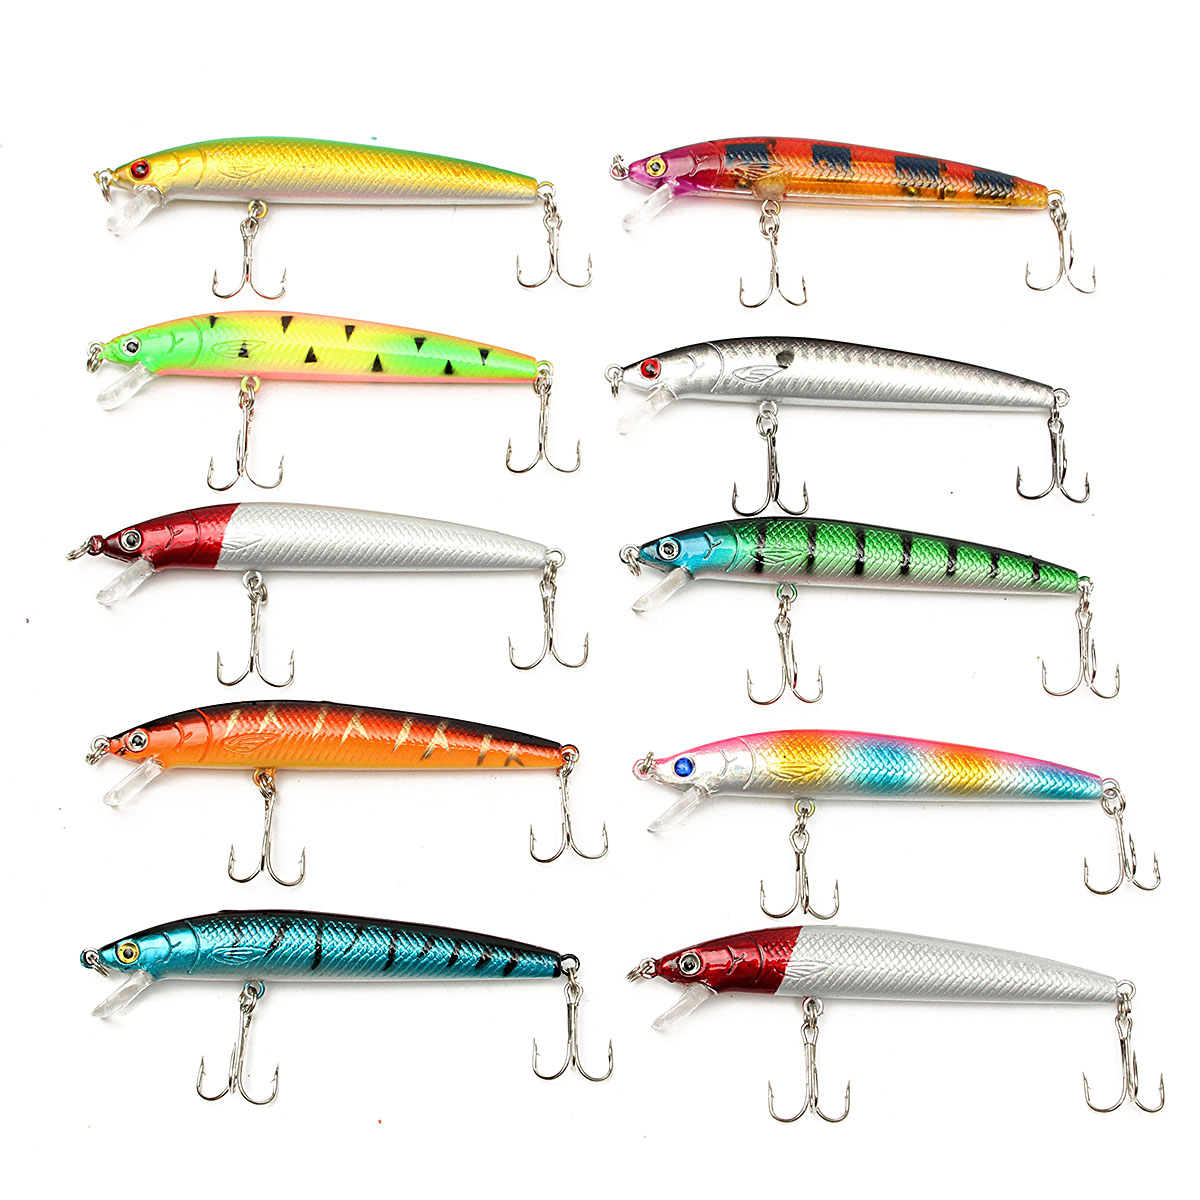 

ZANLURE 20pcs Fishing Lures Assorted Colors Crankbaits Hooks Minnow Spinner Baits Tackle